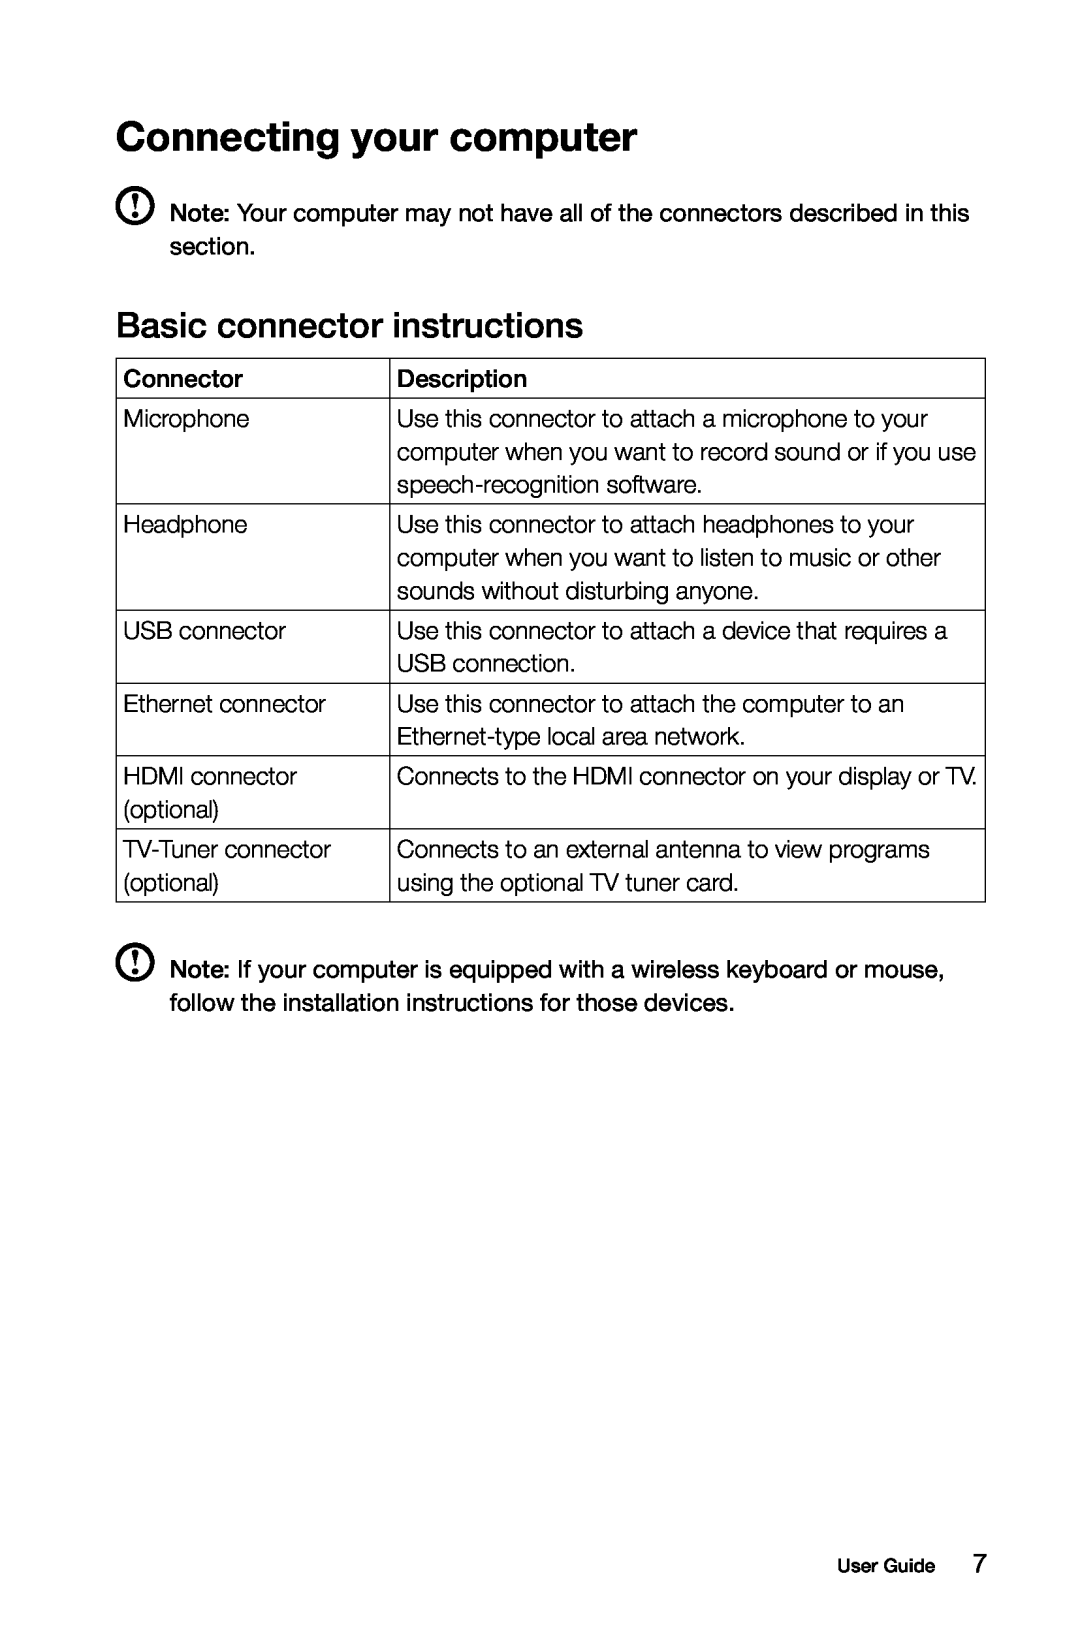 Lenovo A7 manual Connecting your computer, Basic connector instructions 